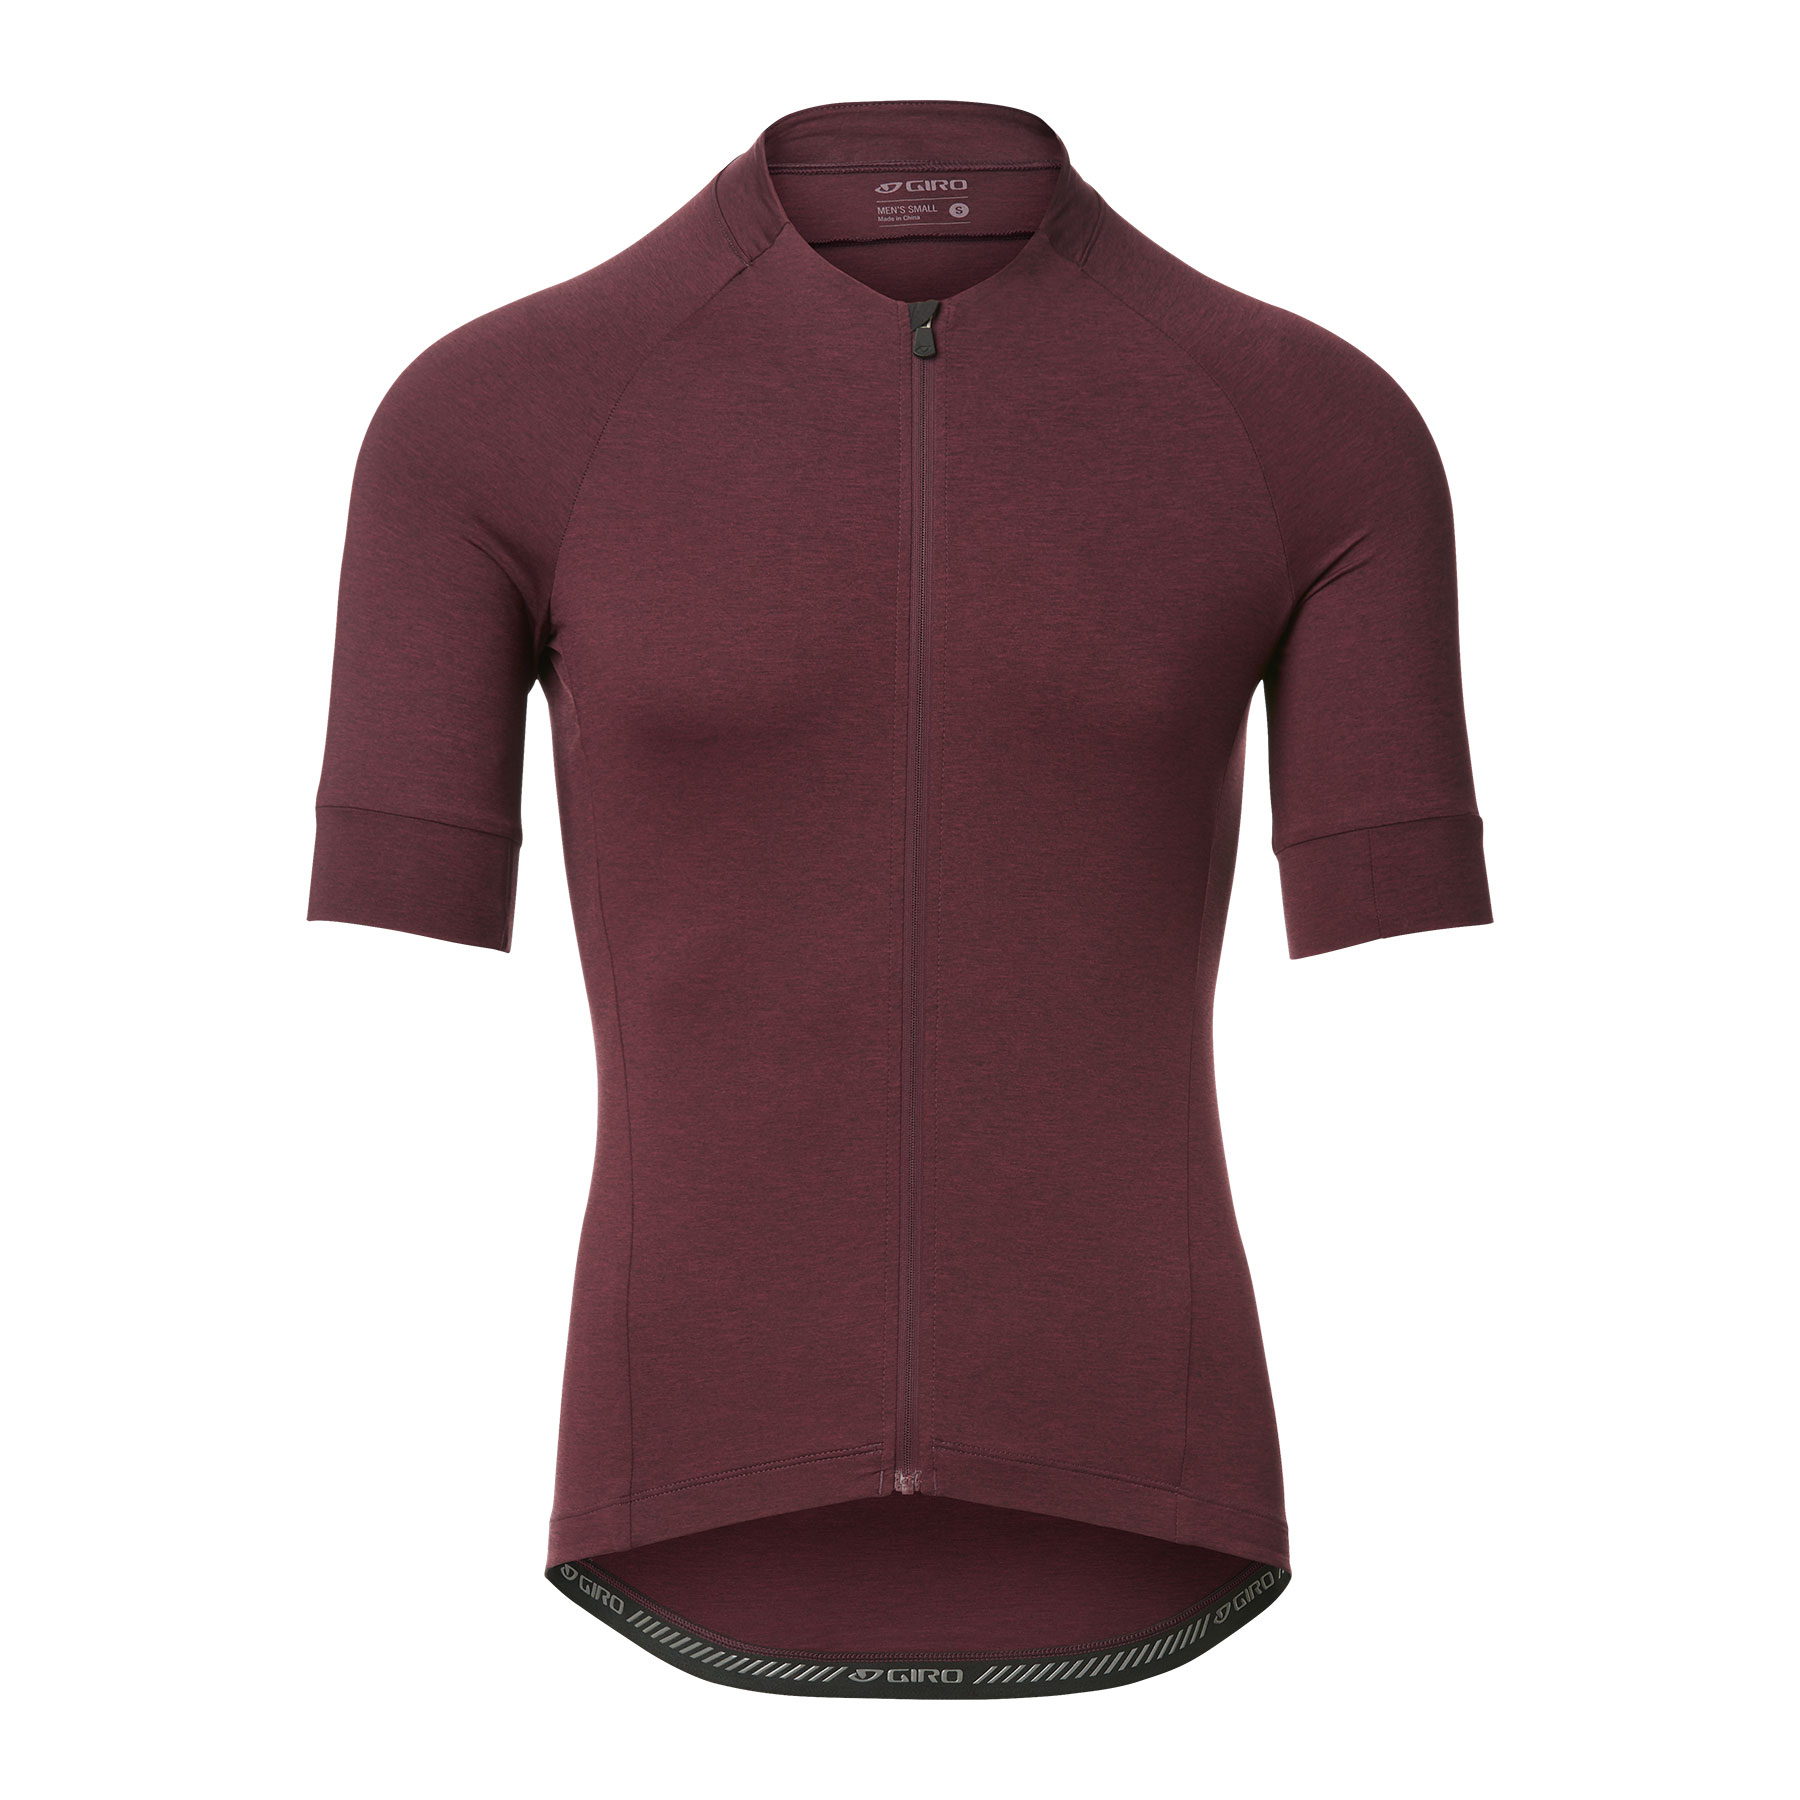 Picture of Giro New Road Short Sleeve Jersey - ox blood heather